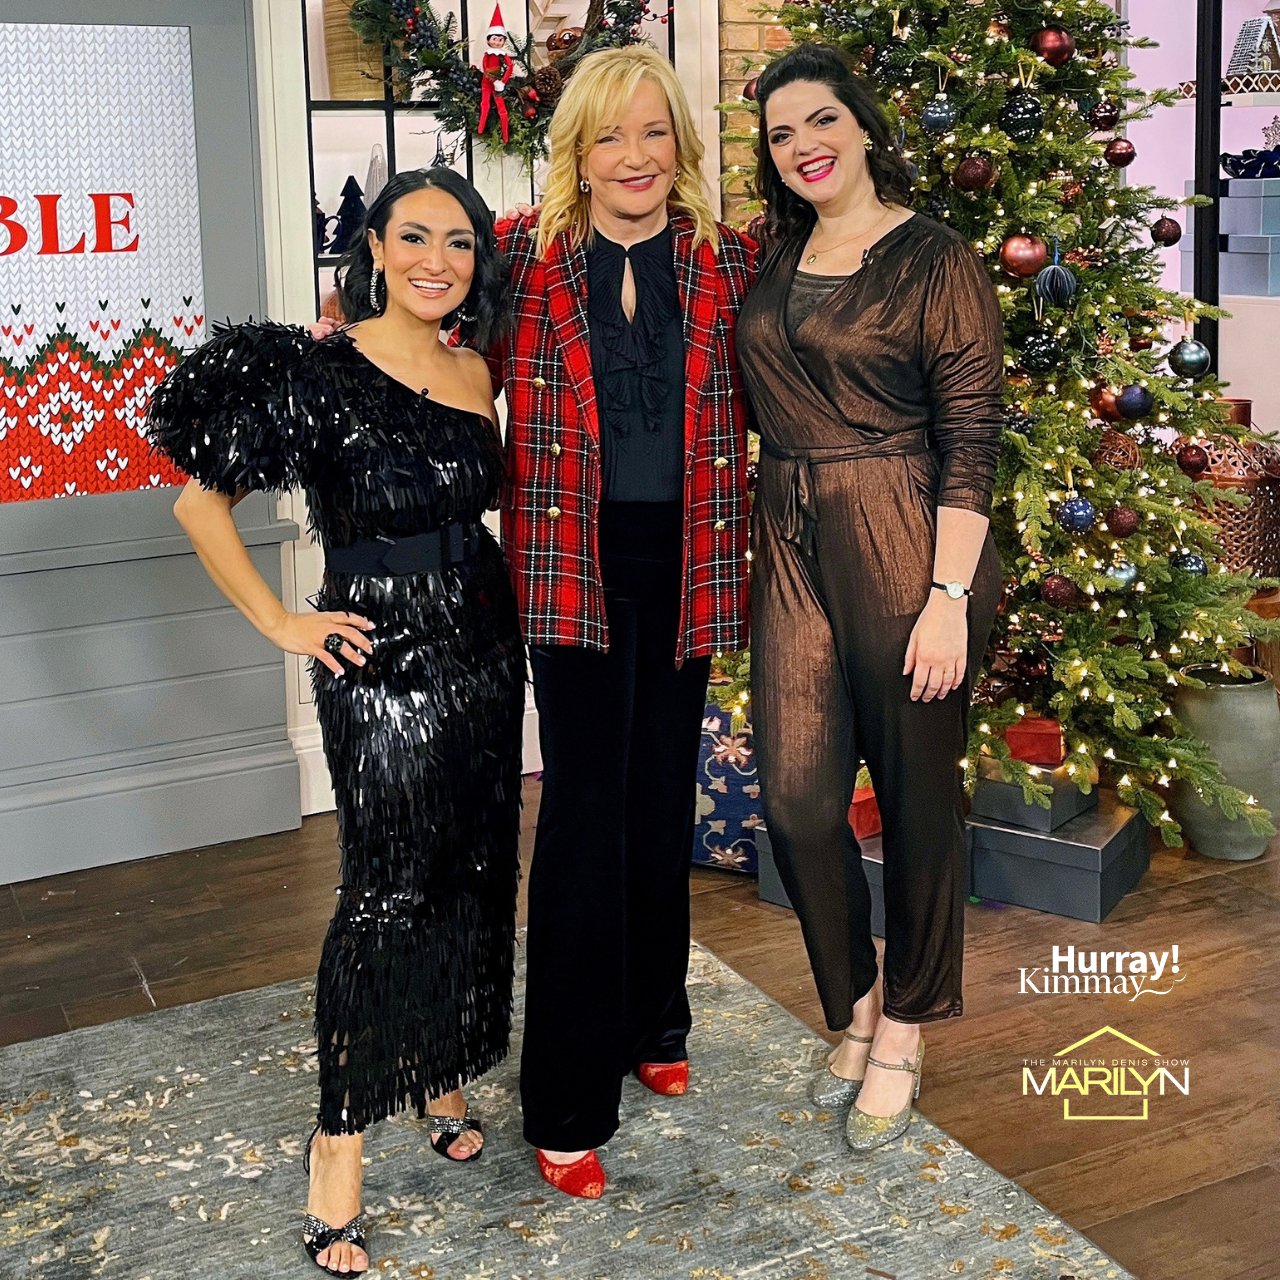 Kimmay on The Marilyn Denis Show - Hurray Kimmay